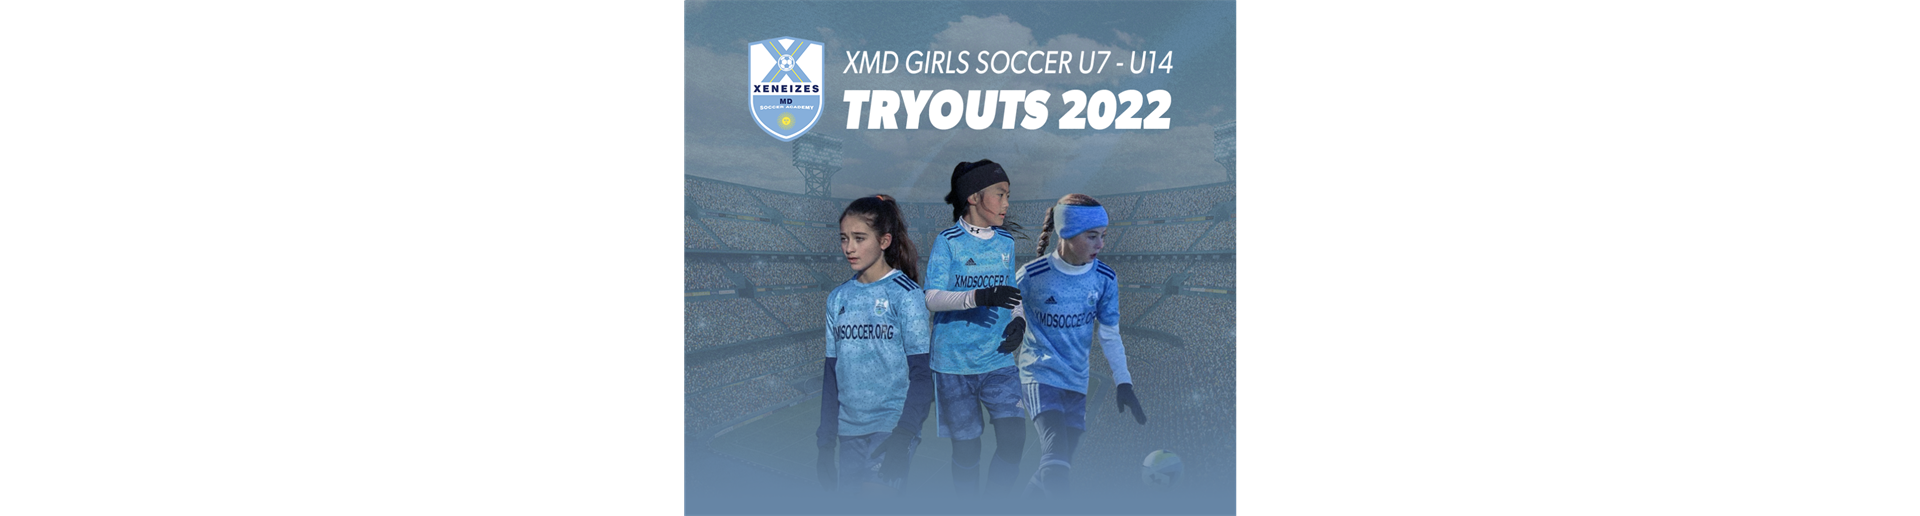 Tryouts Are Here! Boys and Girls Players Register Now!